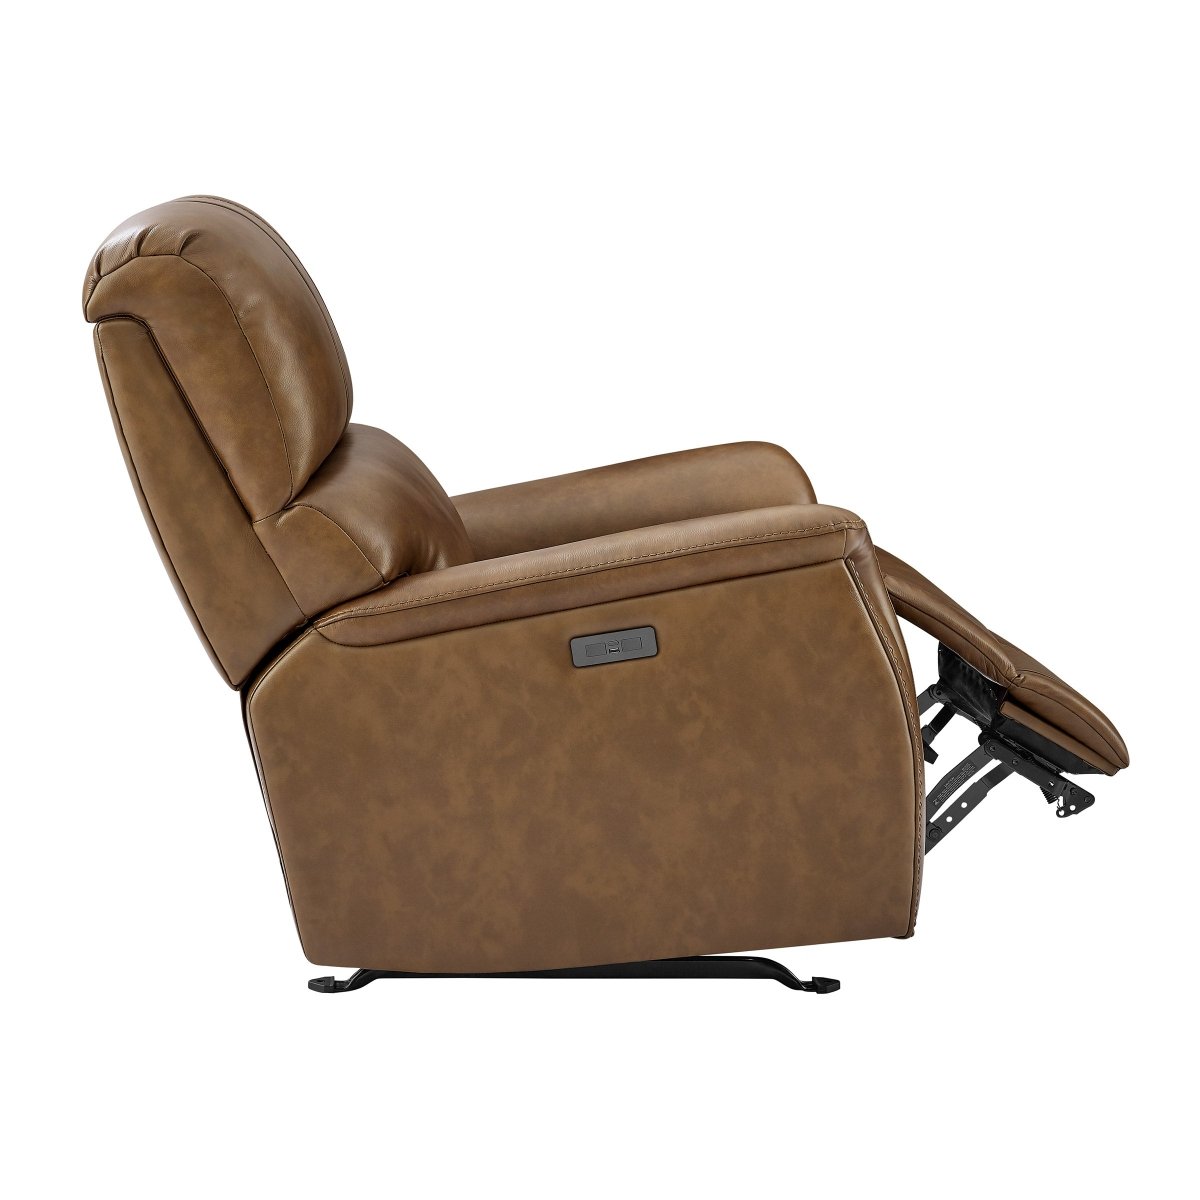 Barcalounger Presley Leather Power Rocker Recliner with Power Headrest - Alpine Outlets